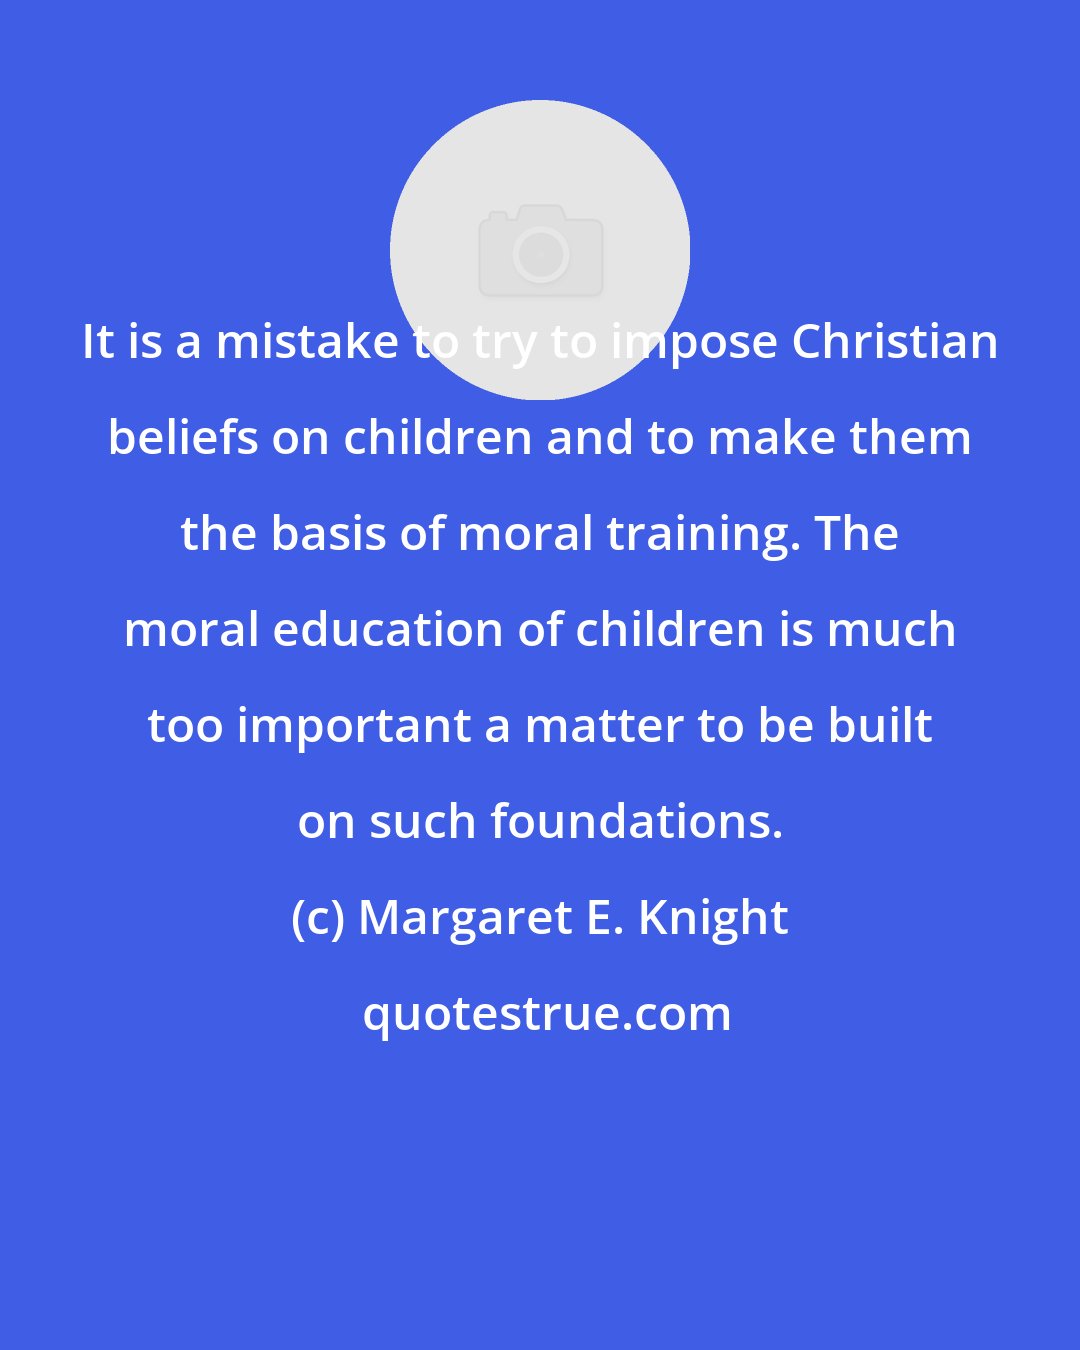 Margaret E. Knight: It is a mistake to try to impose Christian beliefs on children and to make them the basis of moral training. The moral education of children is much too important a matter to be built on such foundations.